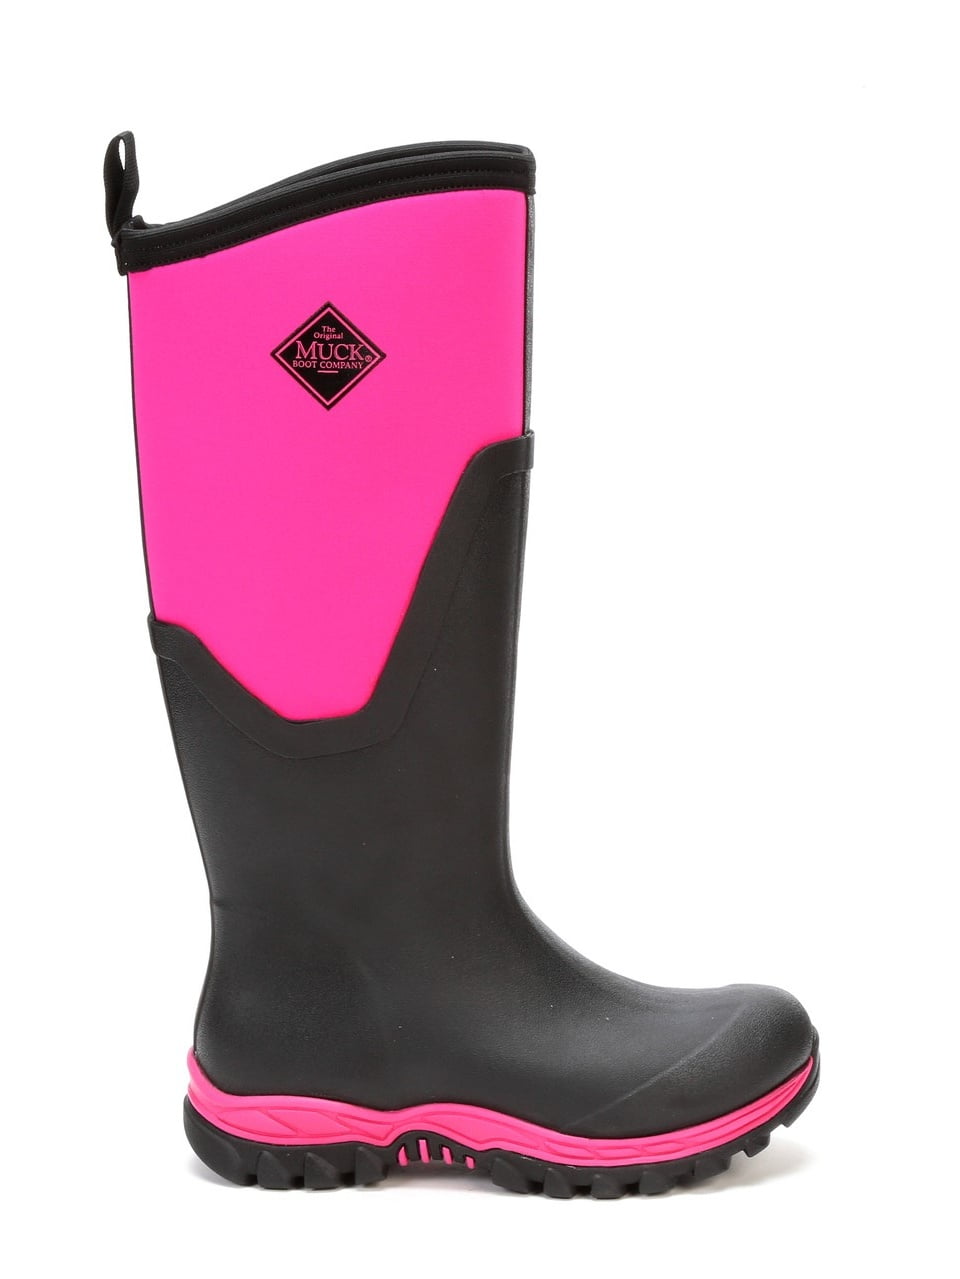 NEW Muck Womens Arctic Ice Mid Snow Winter Boots Pink BLACK EXTREME CONDITIONS 